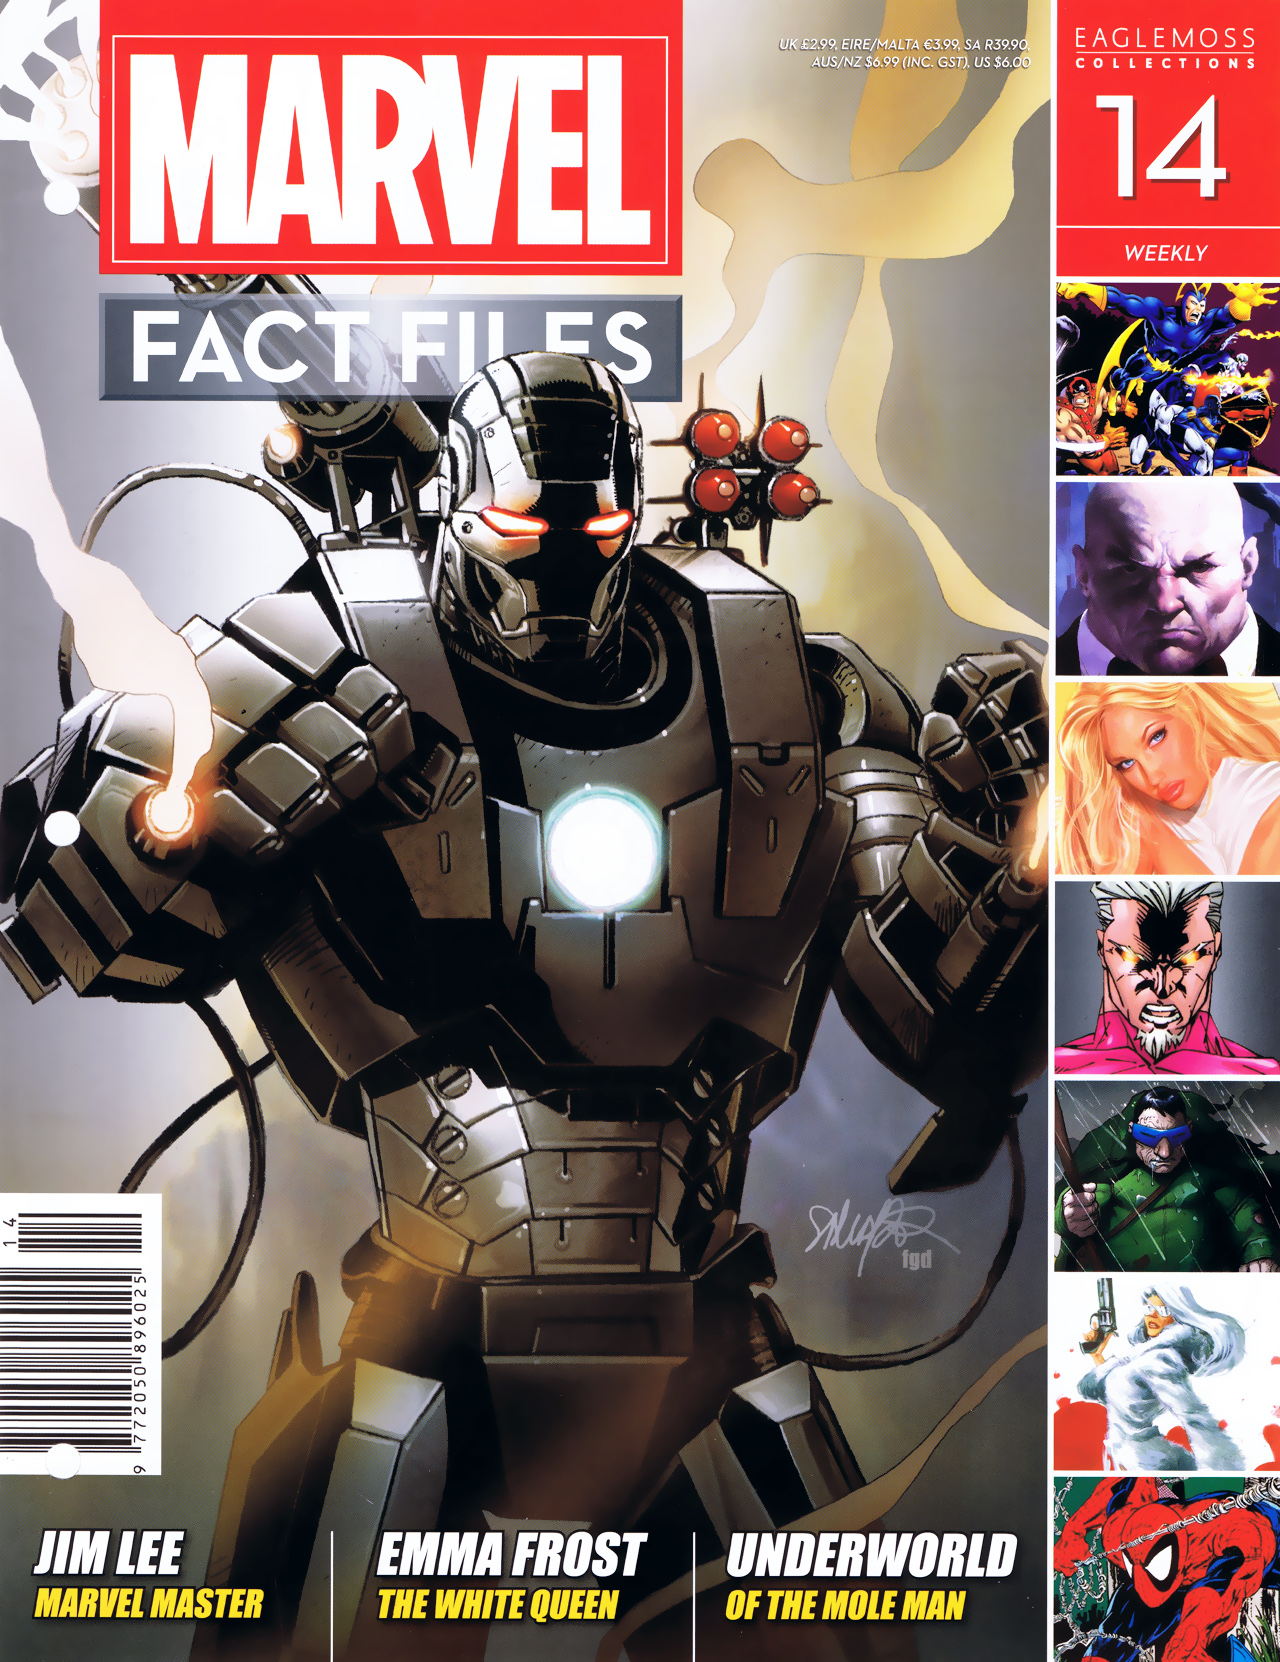 Read online Marvel Fact Files comic -  Issue #14 - 1